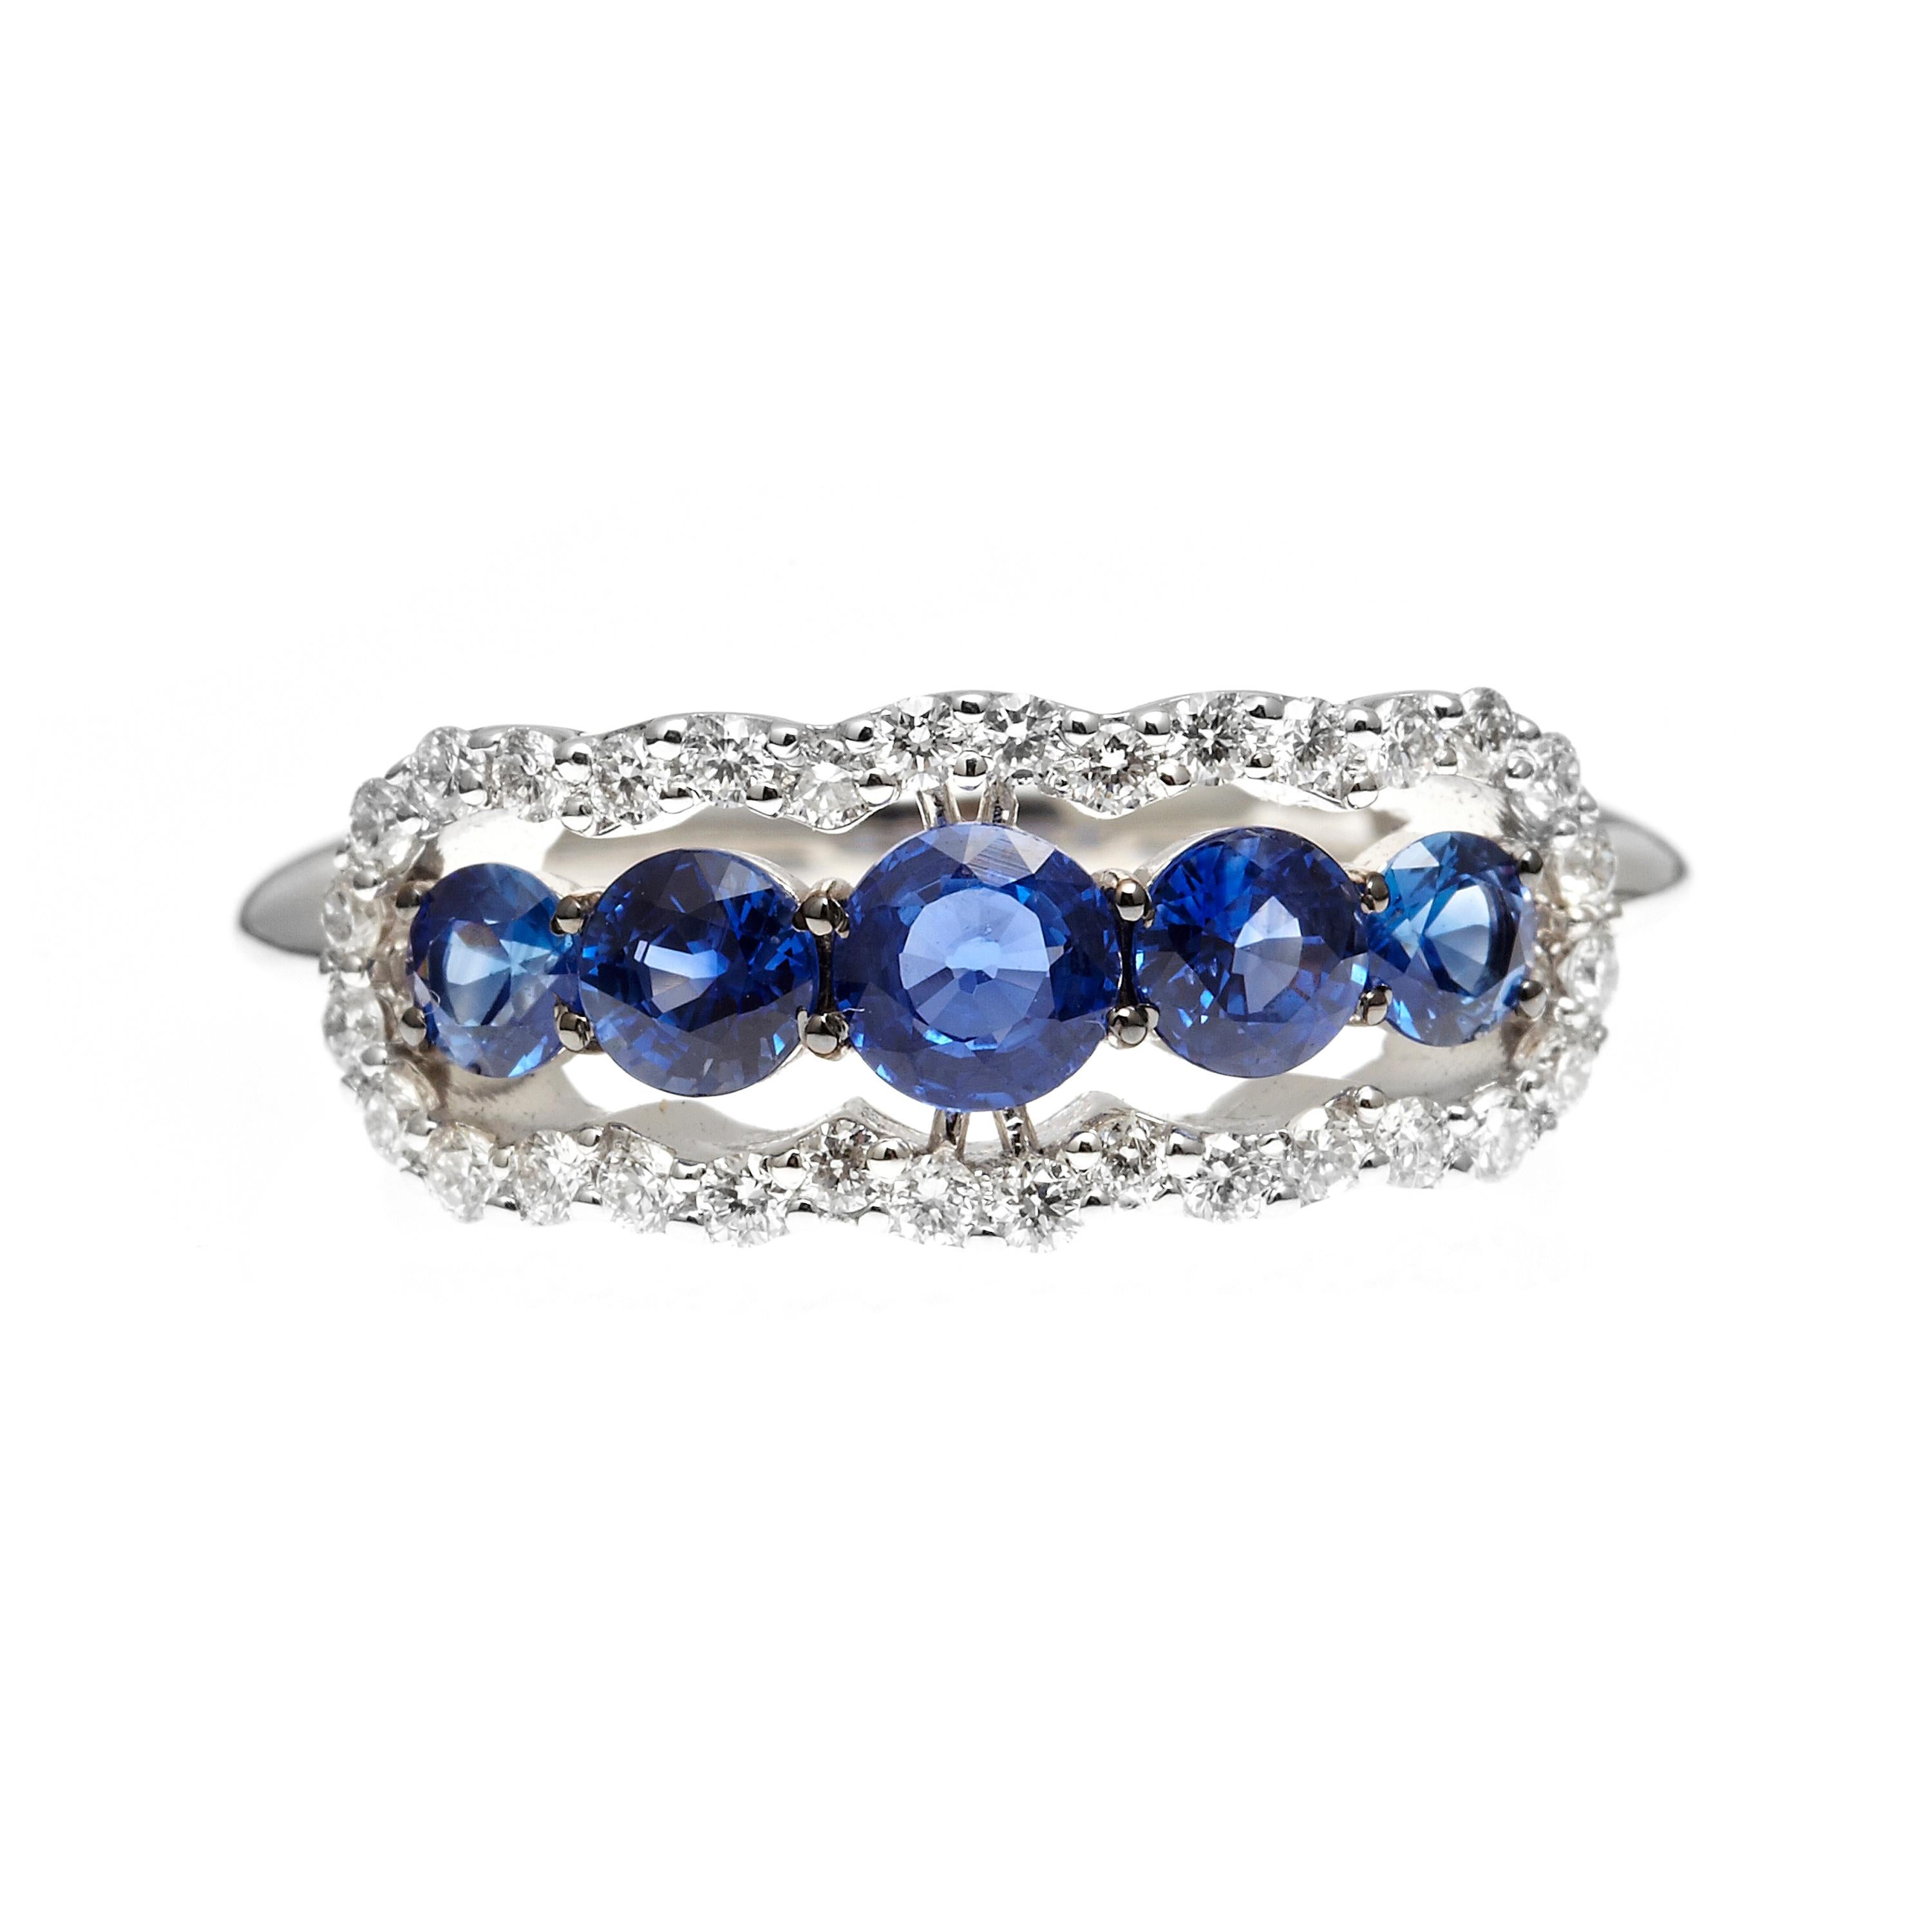 The fabulous everyday ring is perfect when you want to match some bold blue tones with your outfit. 5 graduated round sapphires form a bold blue row and total 1.08ct and are surrounded by 0.30ct of white diamonds to give it a nice pop.